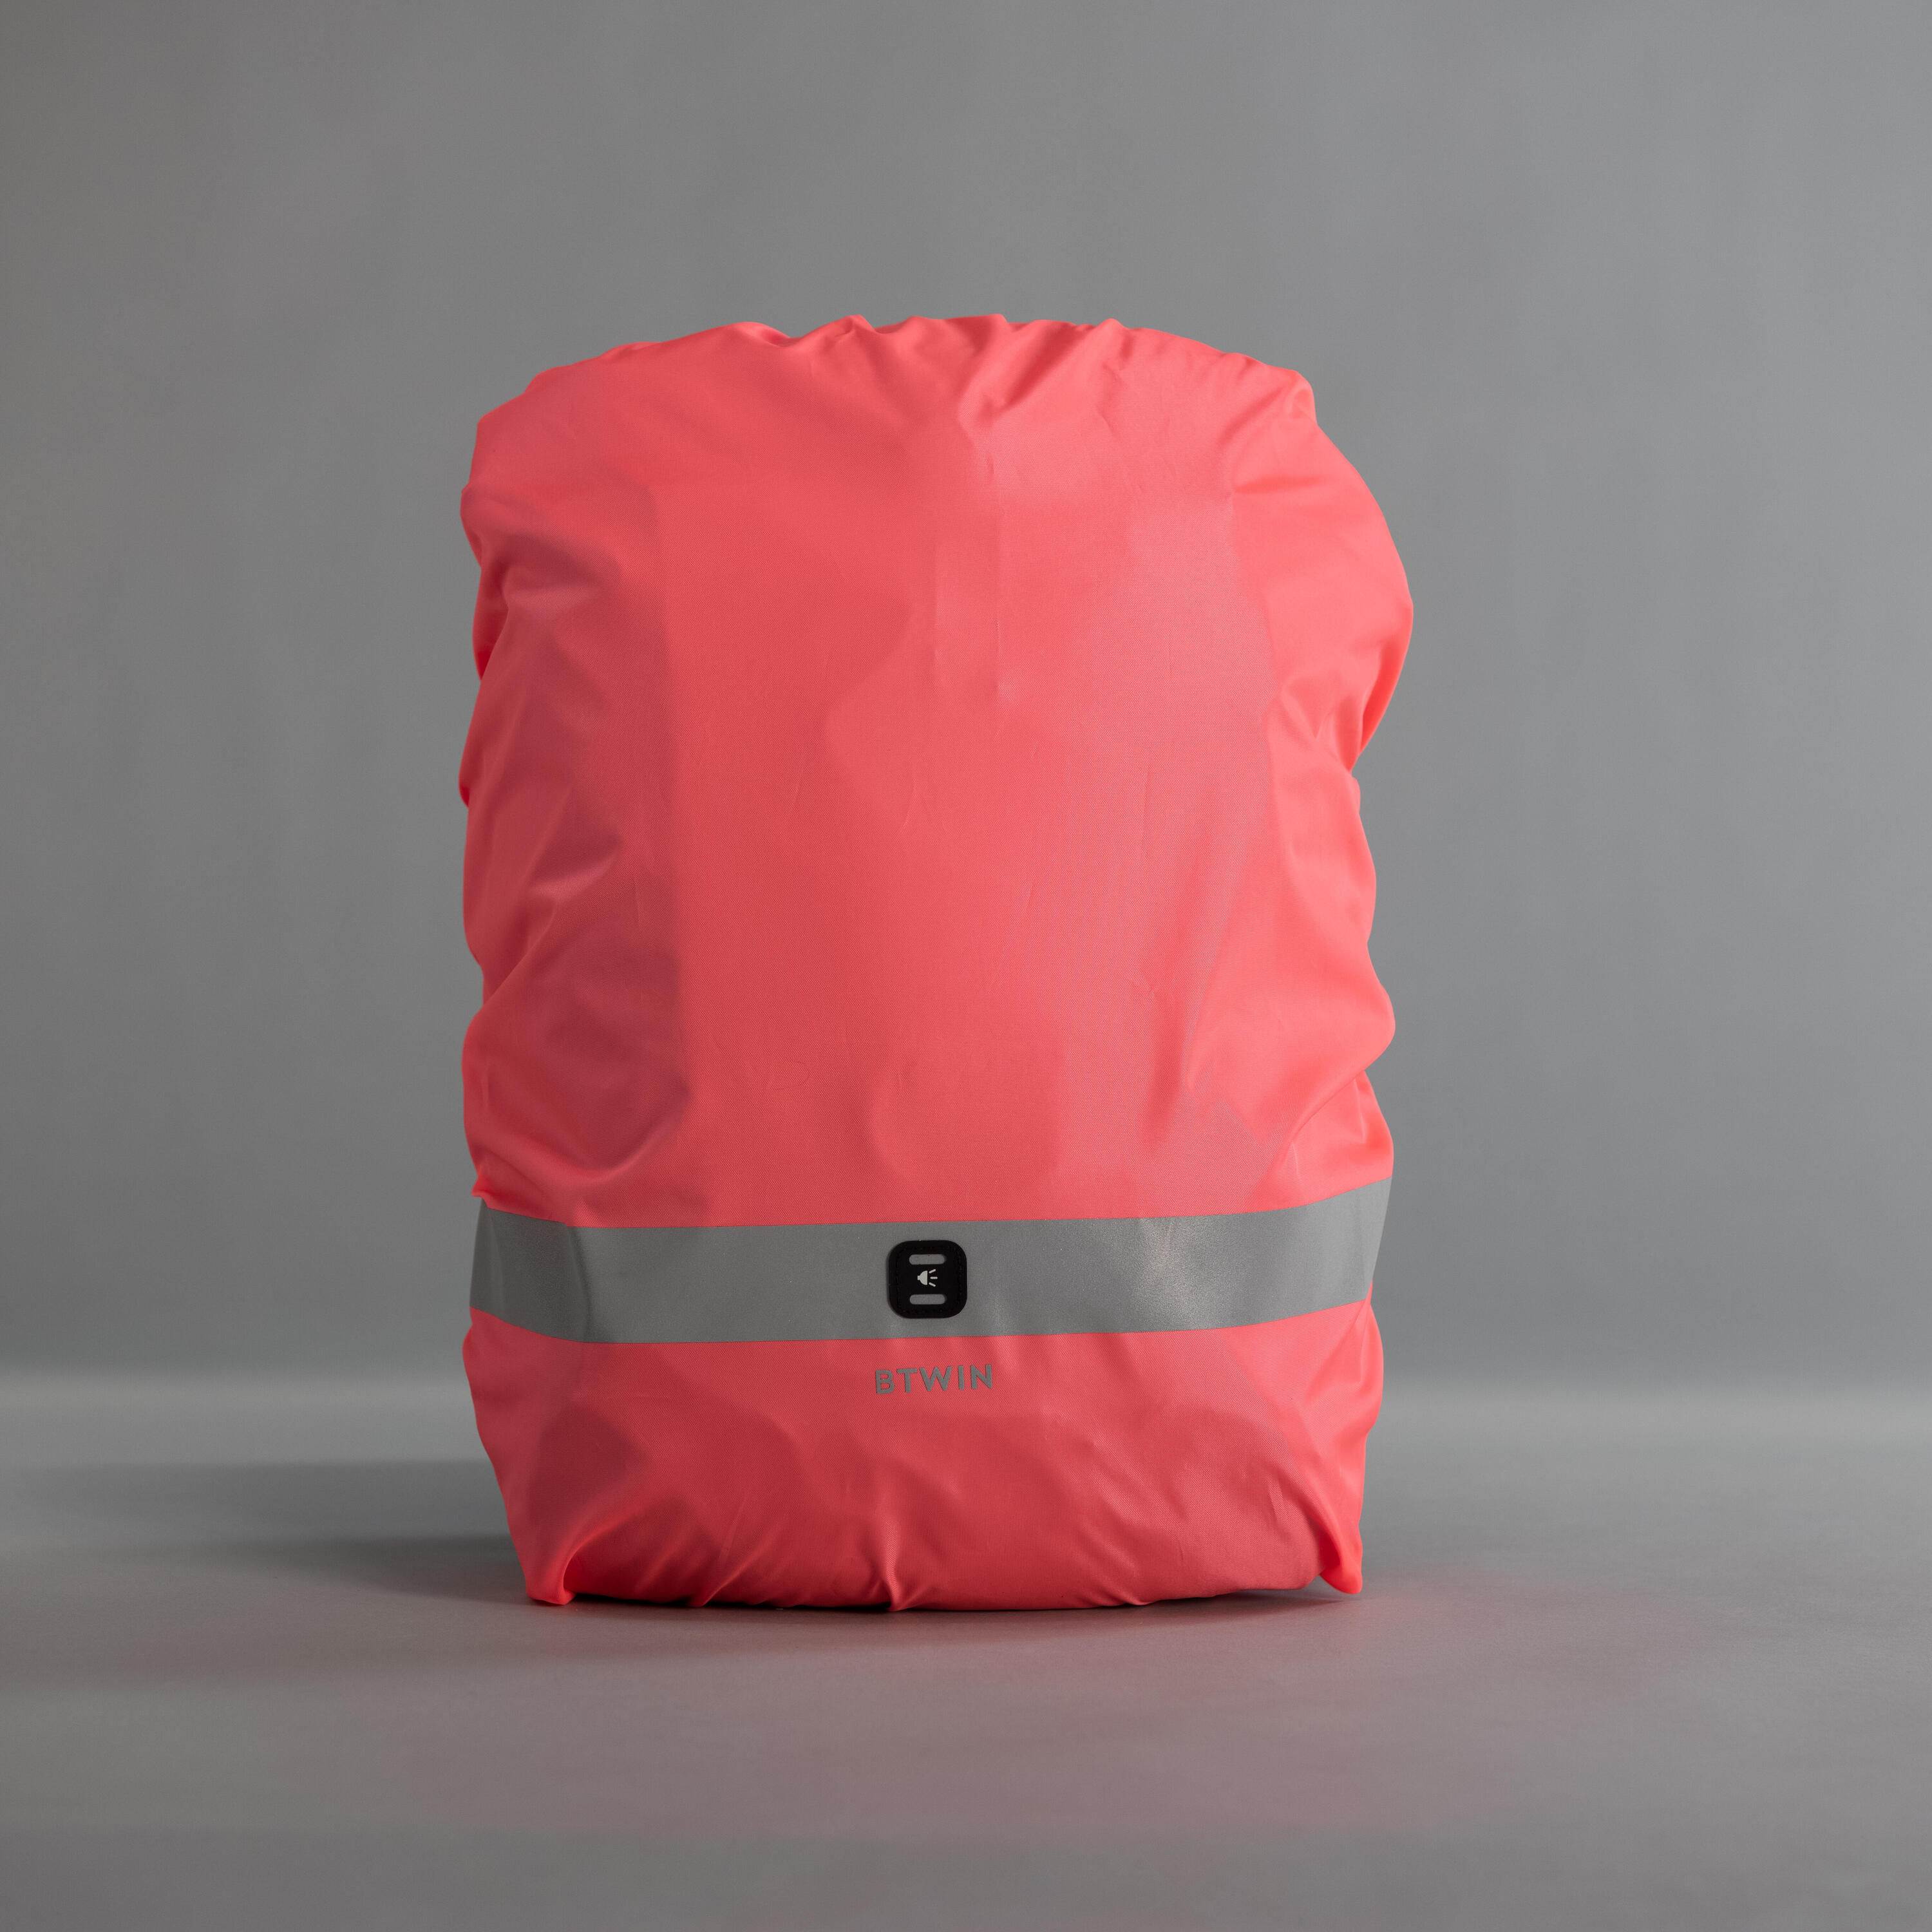 BTWIN Waterproof Day/Night Visibility Bag Cover - Neon Pink